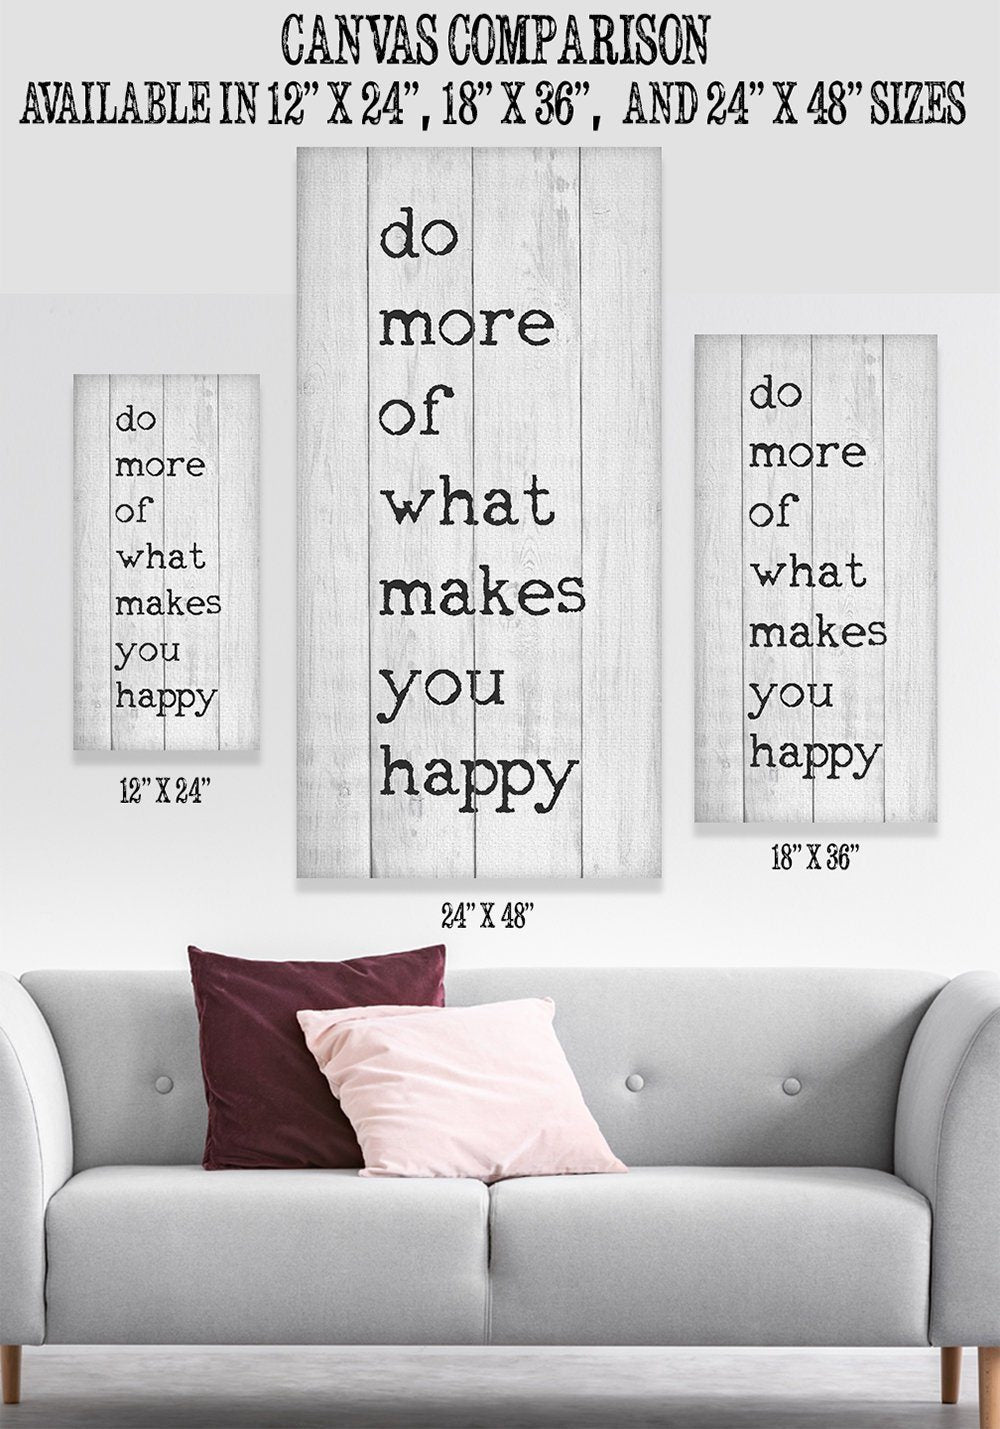 Do More Of What Makes You Happy - Canvas | Lone Star Art.